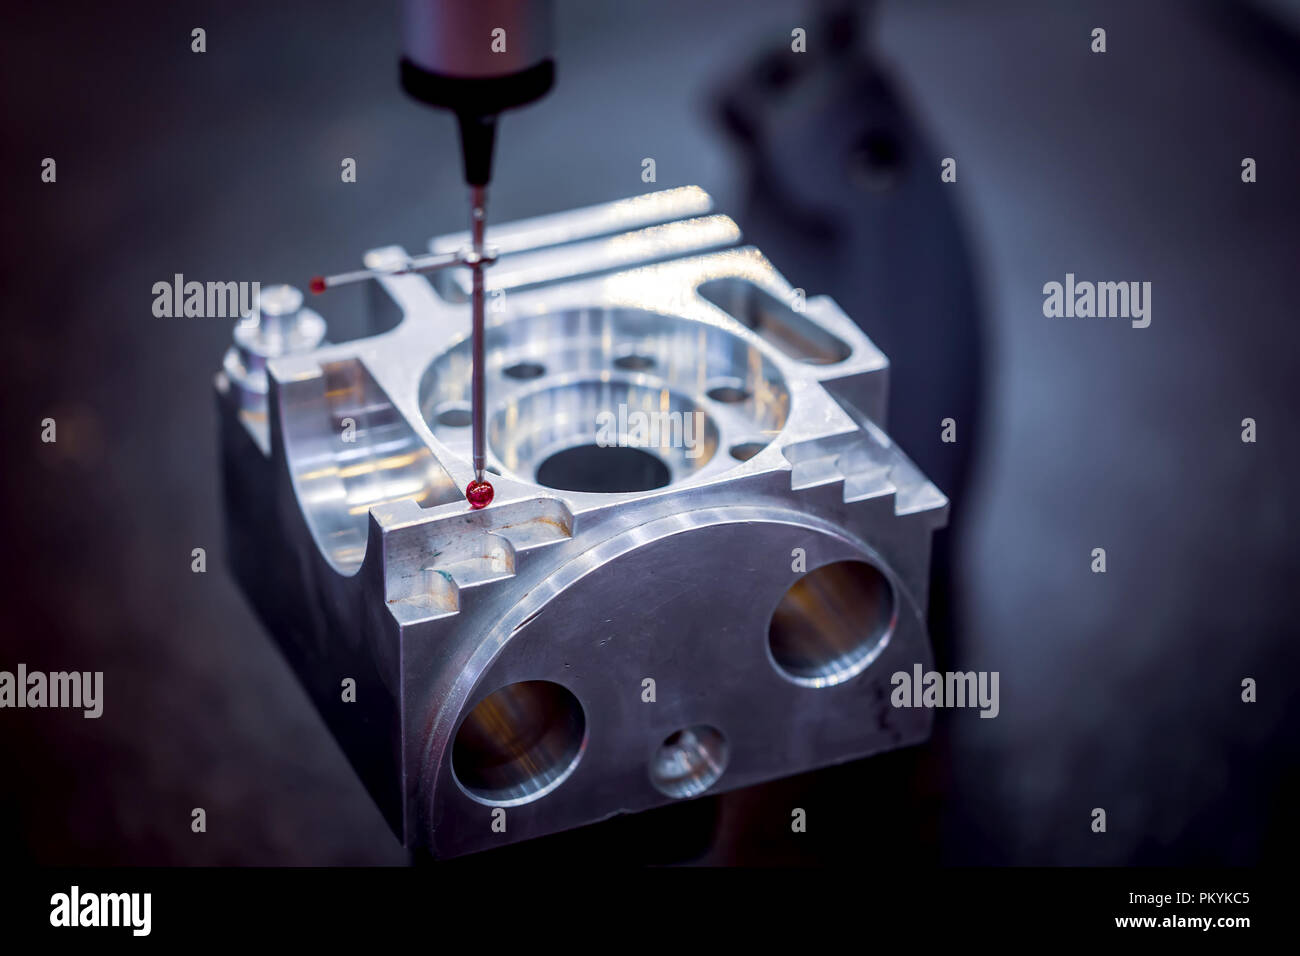 Quality control measurement probe. Metalworking CNC milling machine. Cutting metal modern processing technology. Small depth of field. Warning - authe Stock Photo